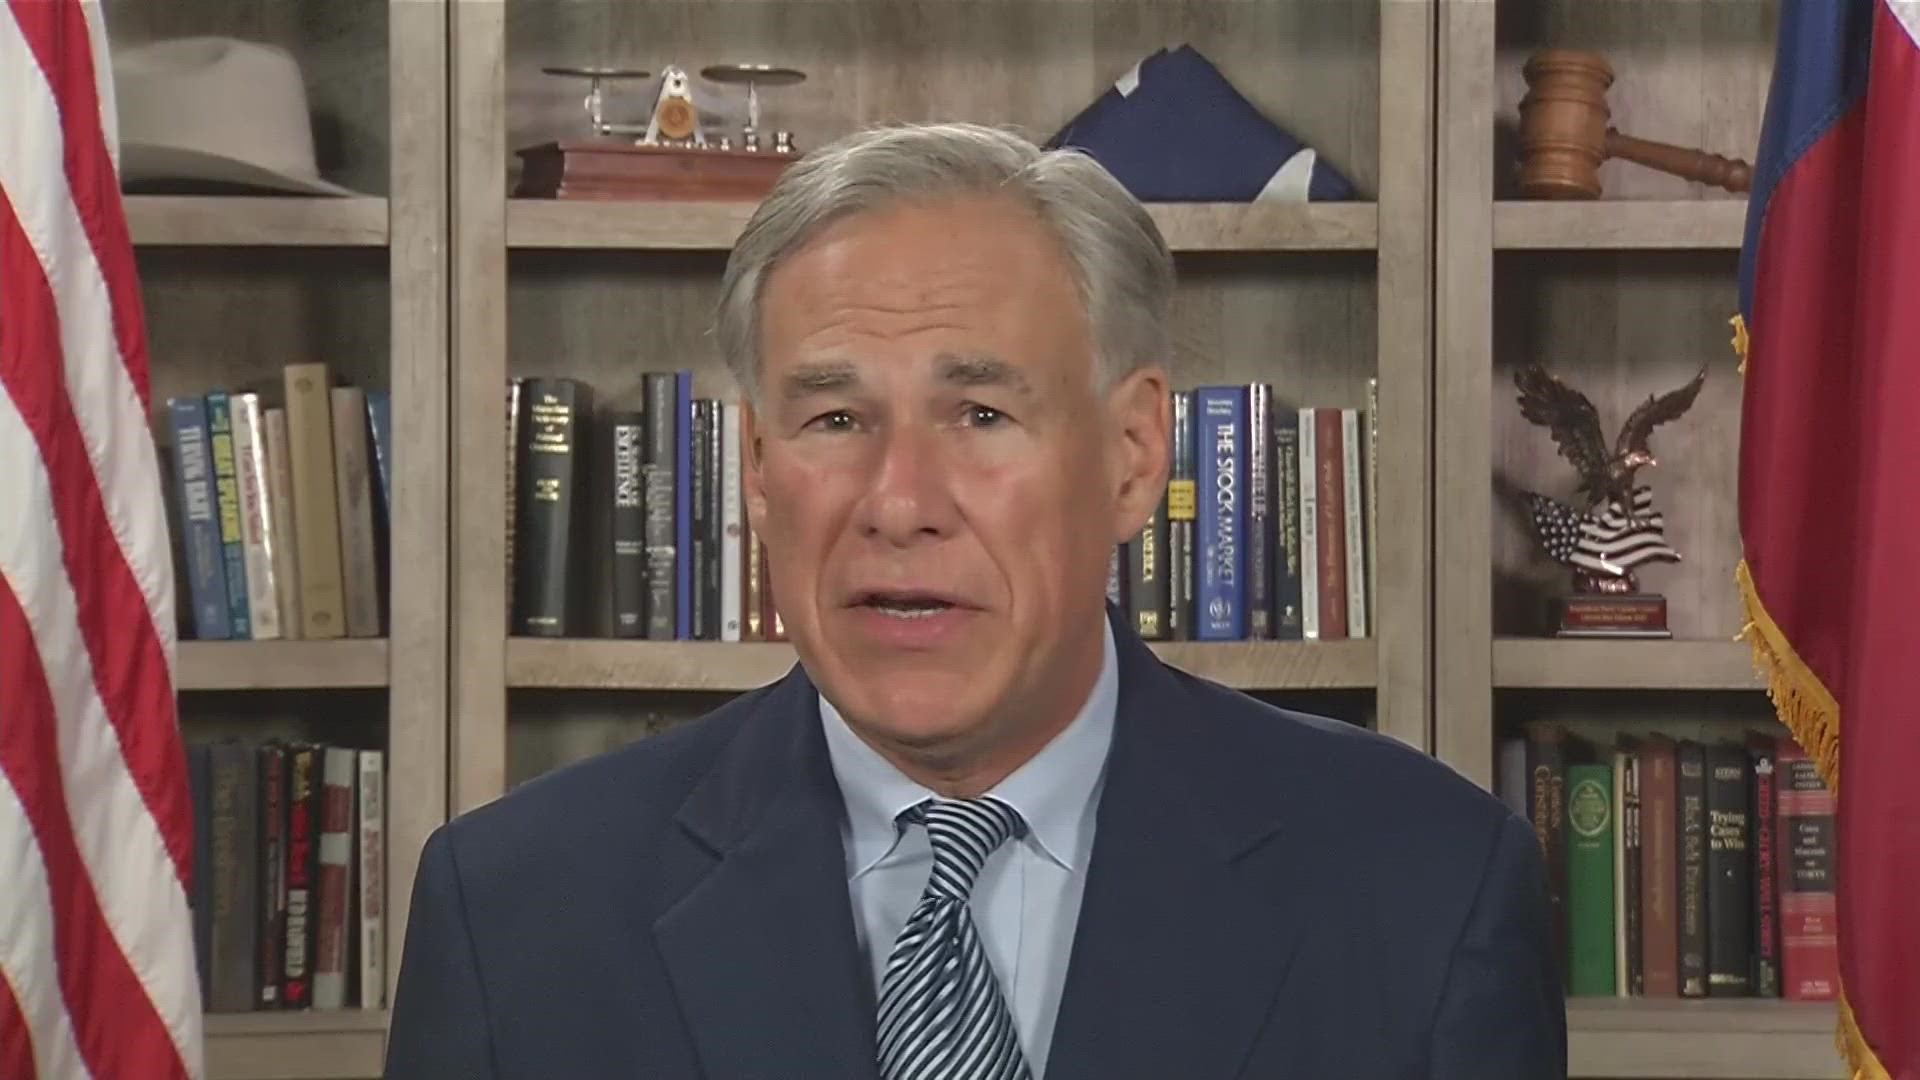 Gov. Greg Abbott joined KVUE on Monday, July 11, to talk about some of the big issues Texas is facing. The governor discussed the power grid, immigration and Uvalde.